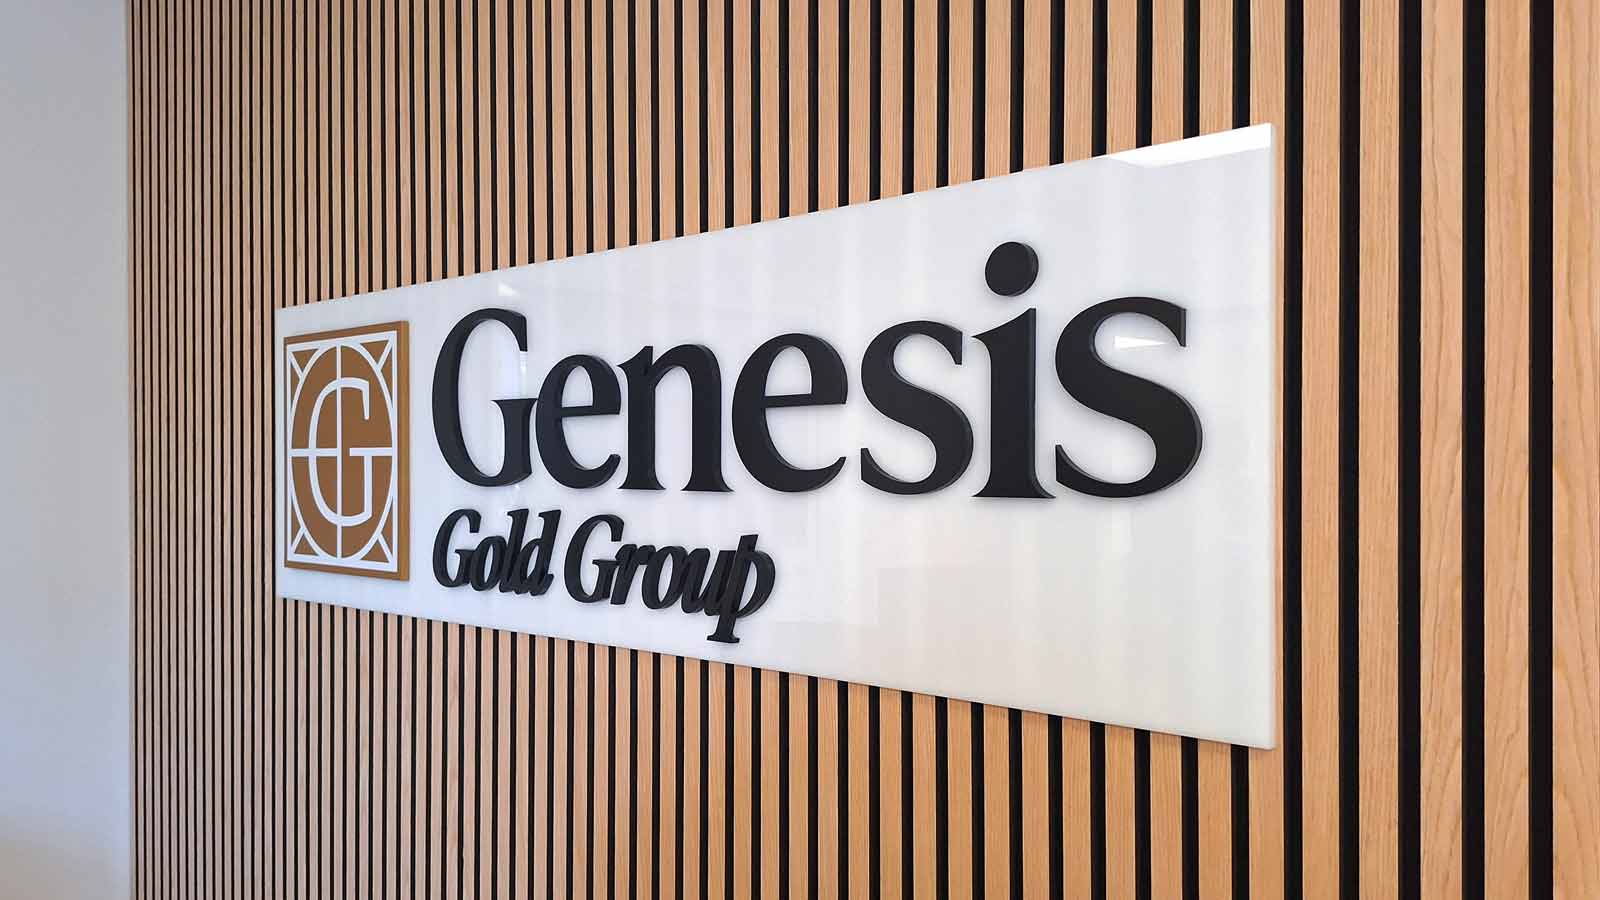 genesis gold group acrylic sign installed indoors